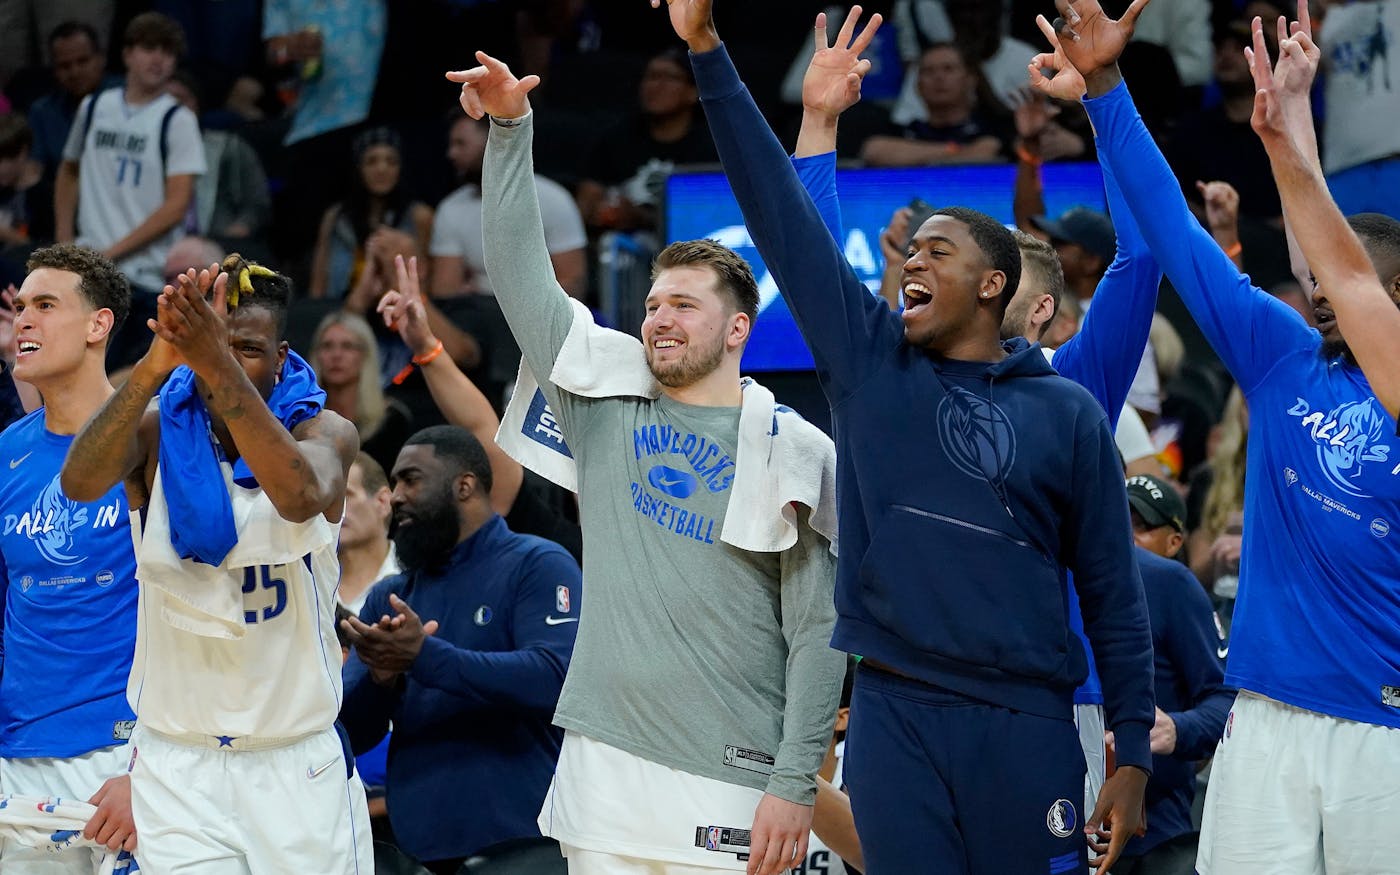 Dallas Mavs Shop on X: That's history right there, you